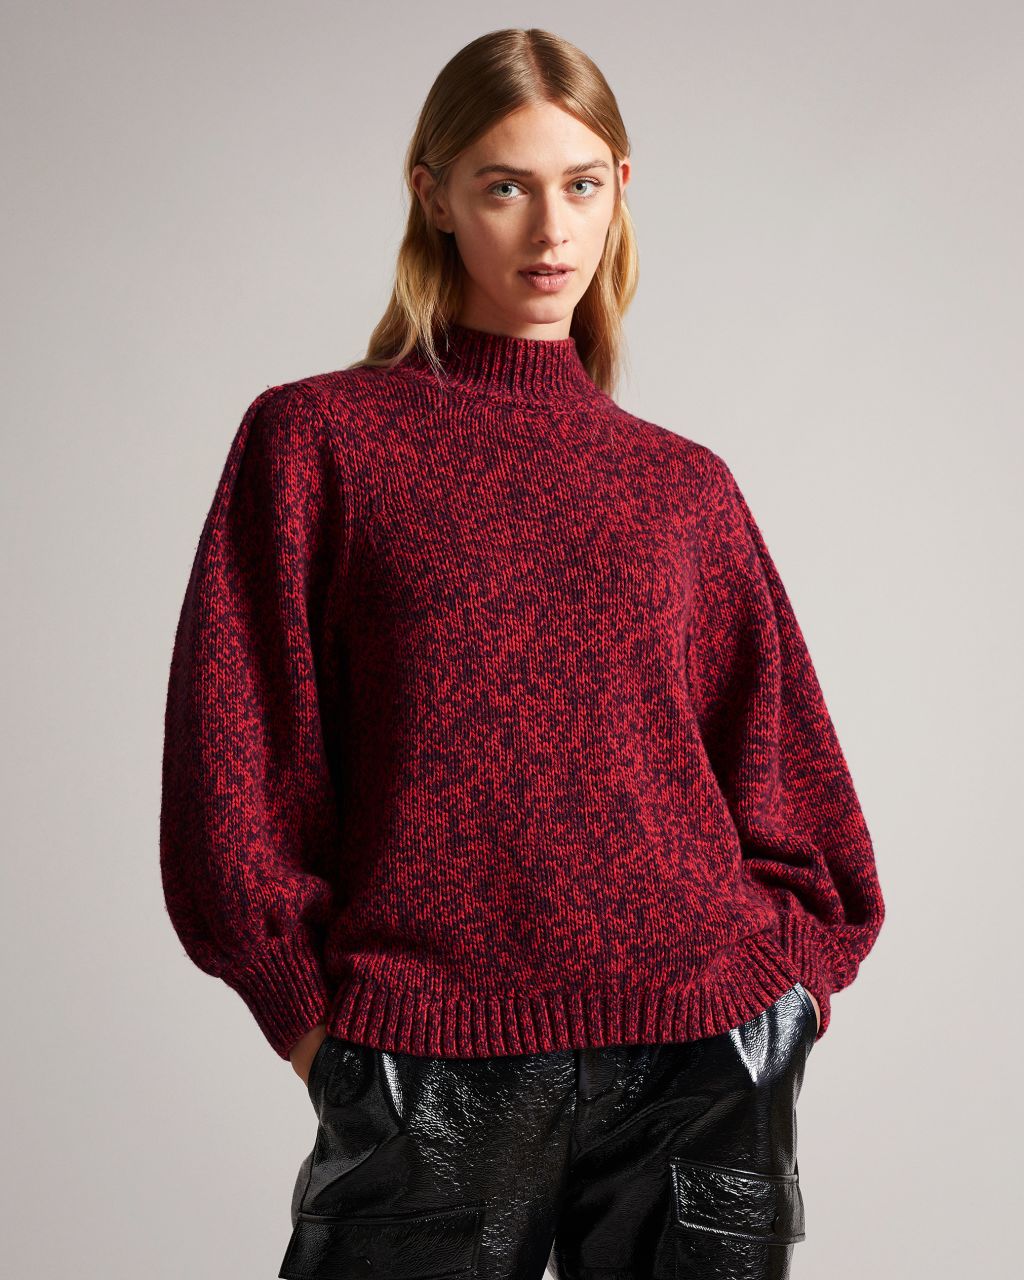 Ted Baker Women's Statement Sleeve Chunky Jumper in Bright Red, Elvinaa, Wool